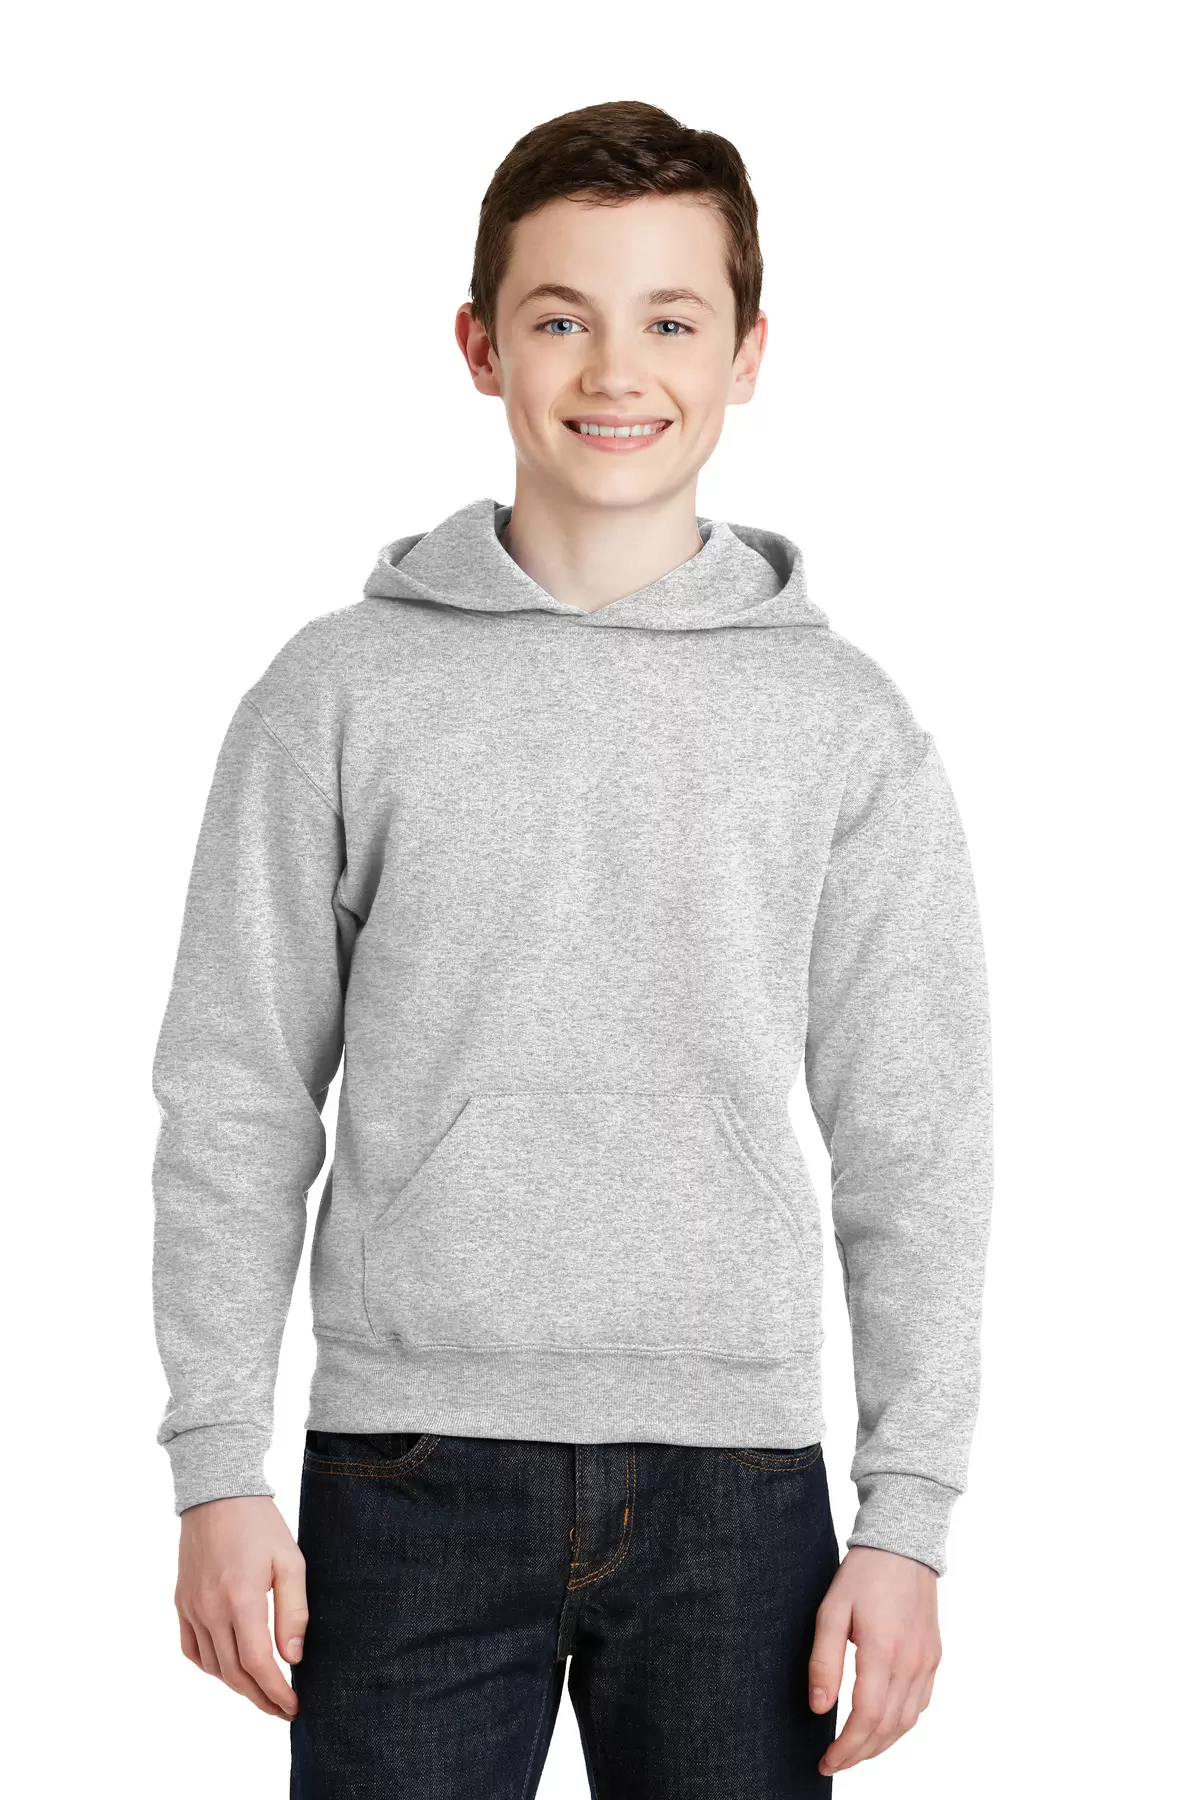 JERZEES 996Y NuBlend Youth Hooded Pullover Sweatshirt - From $12.93